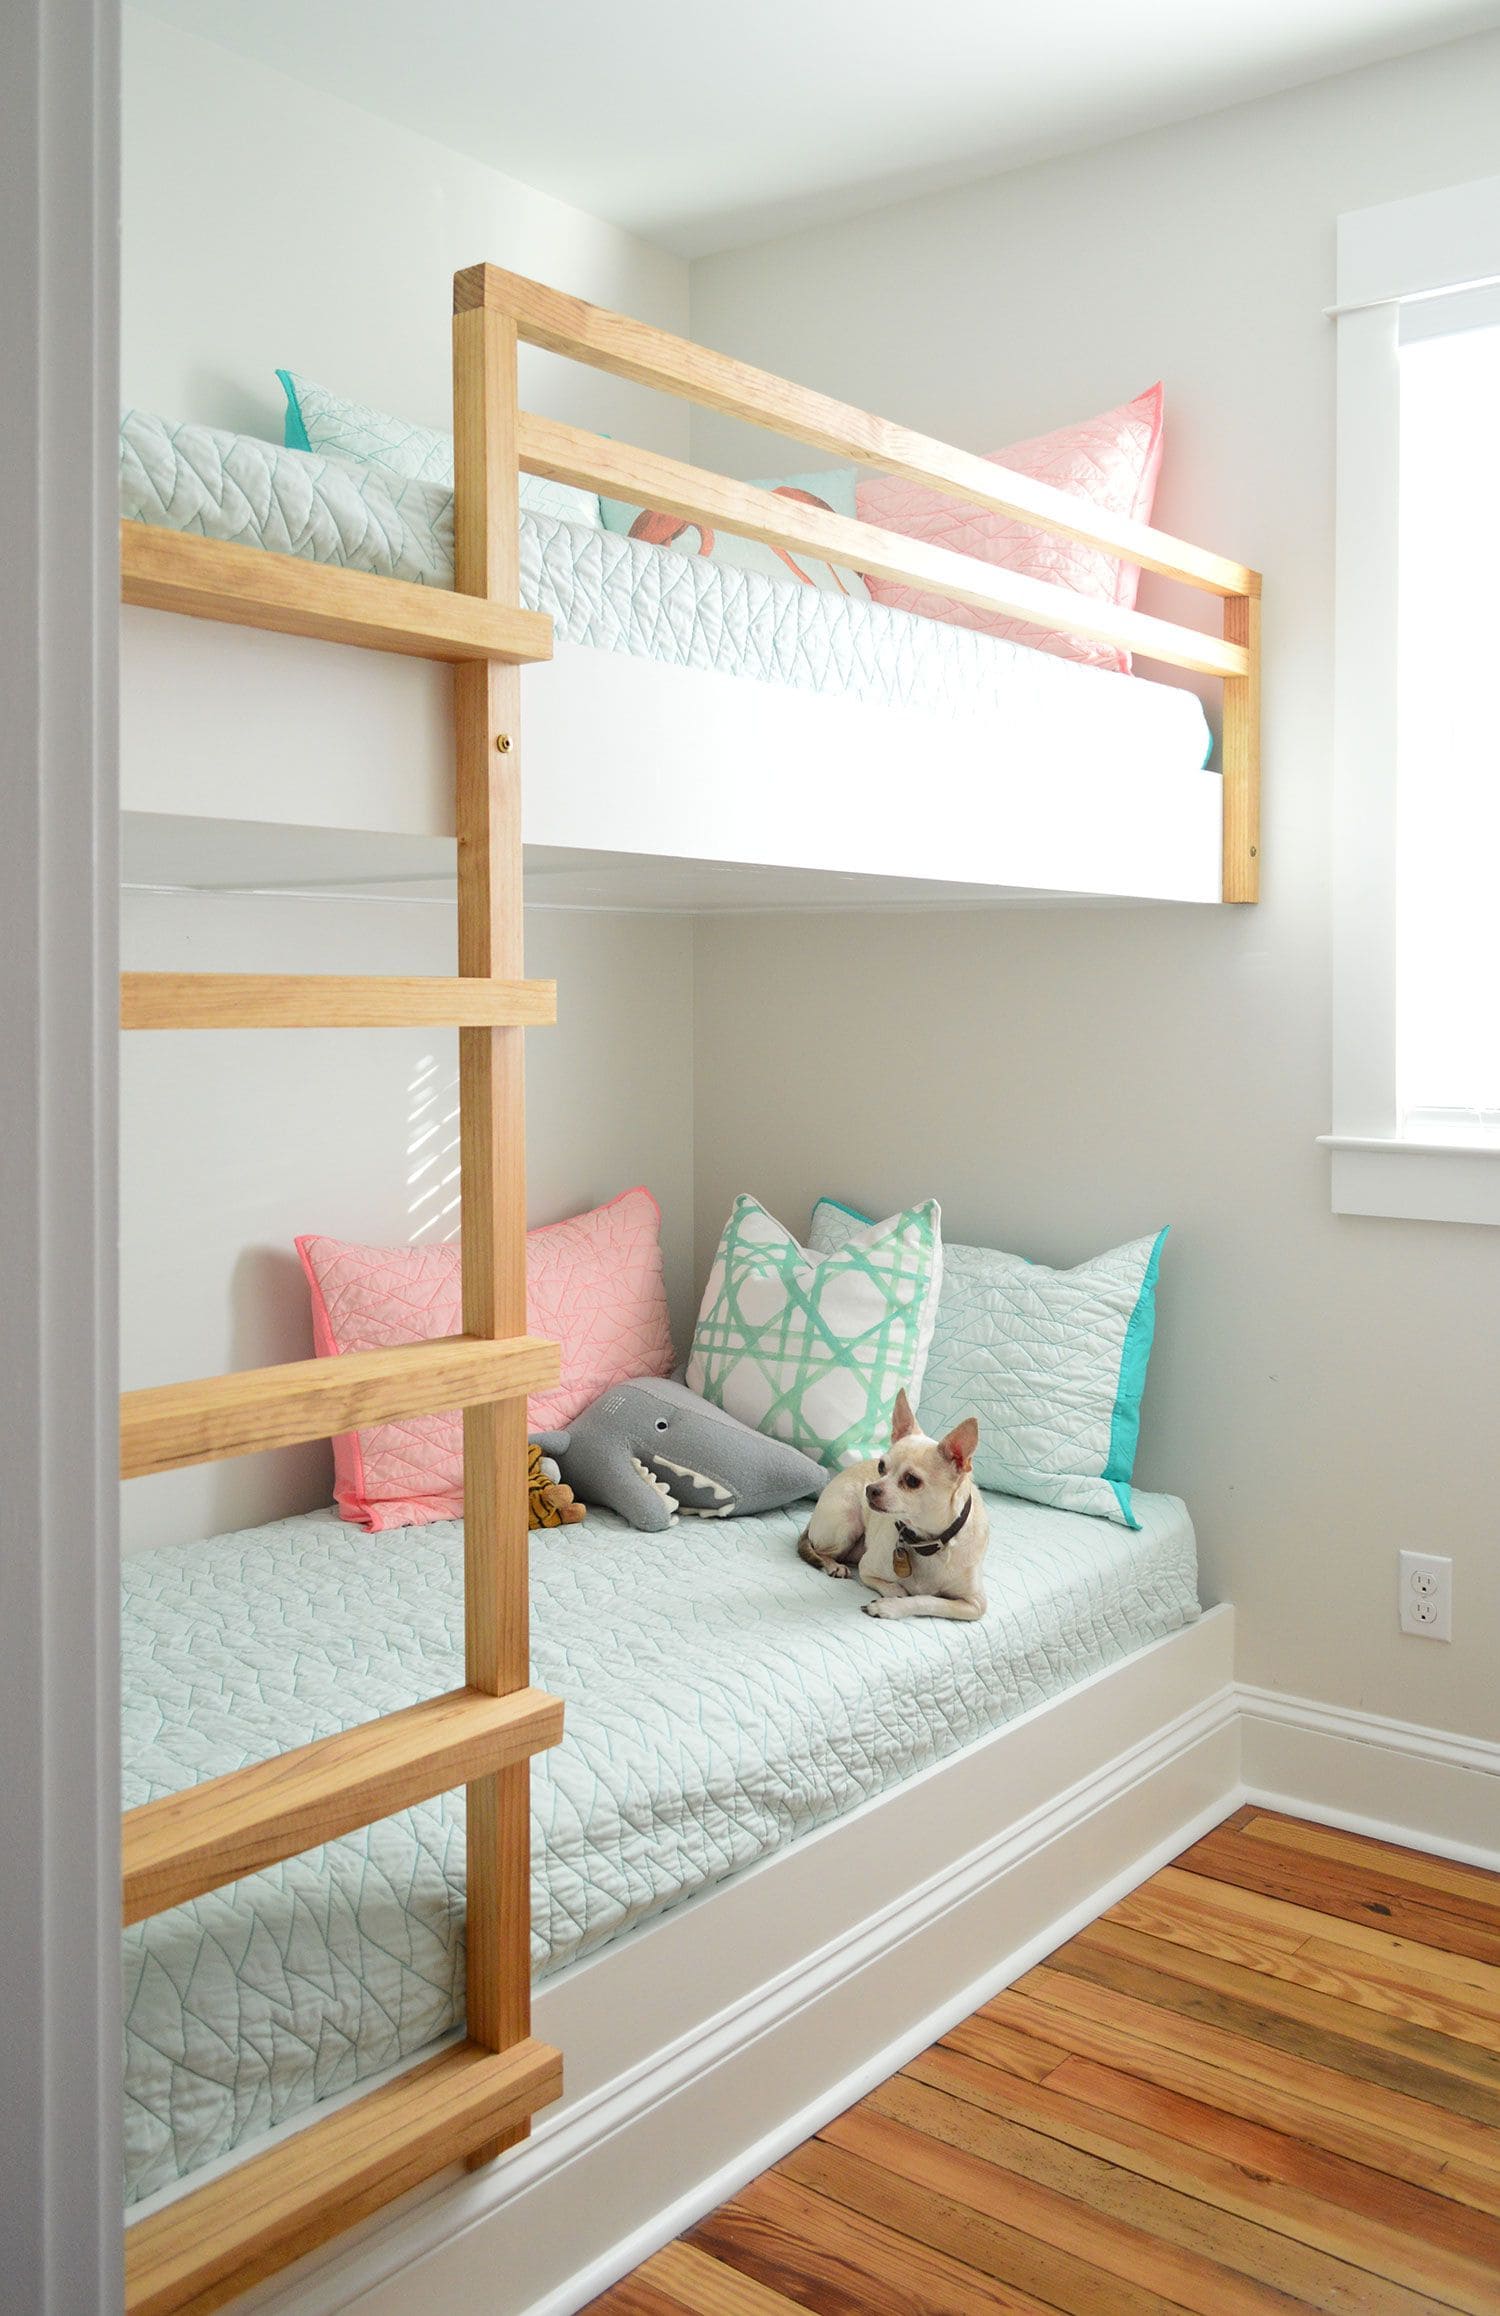 25 fantastic built-in bed ideas for children's rooms - 83